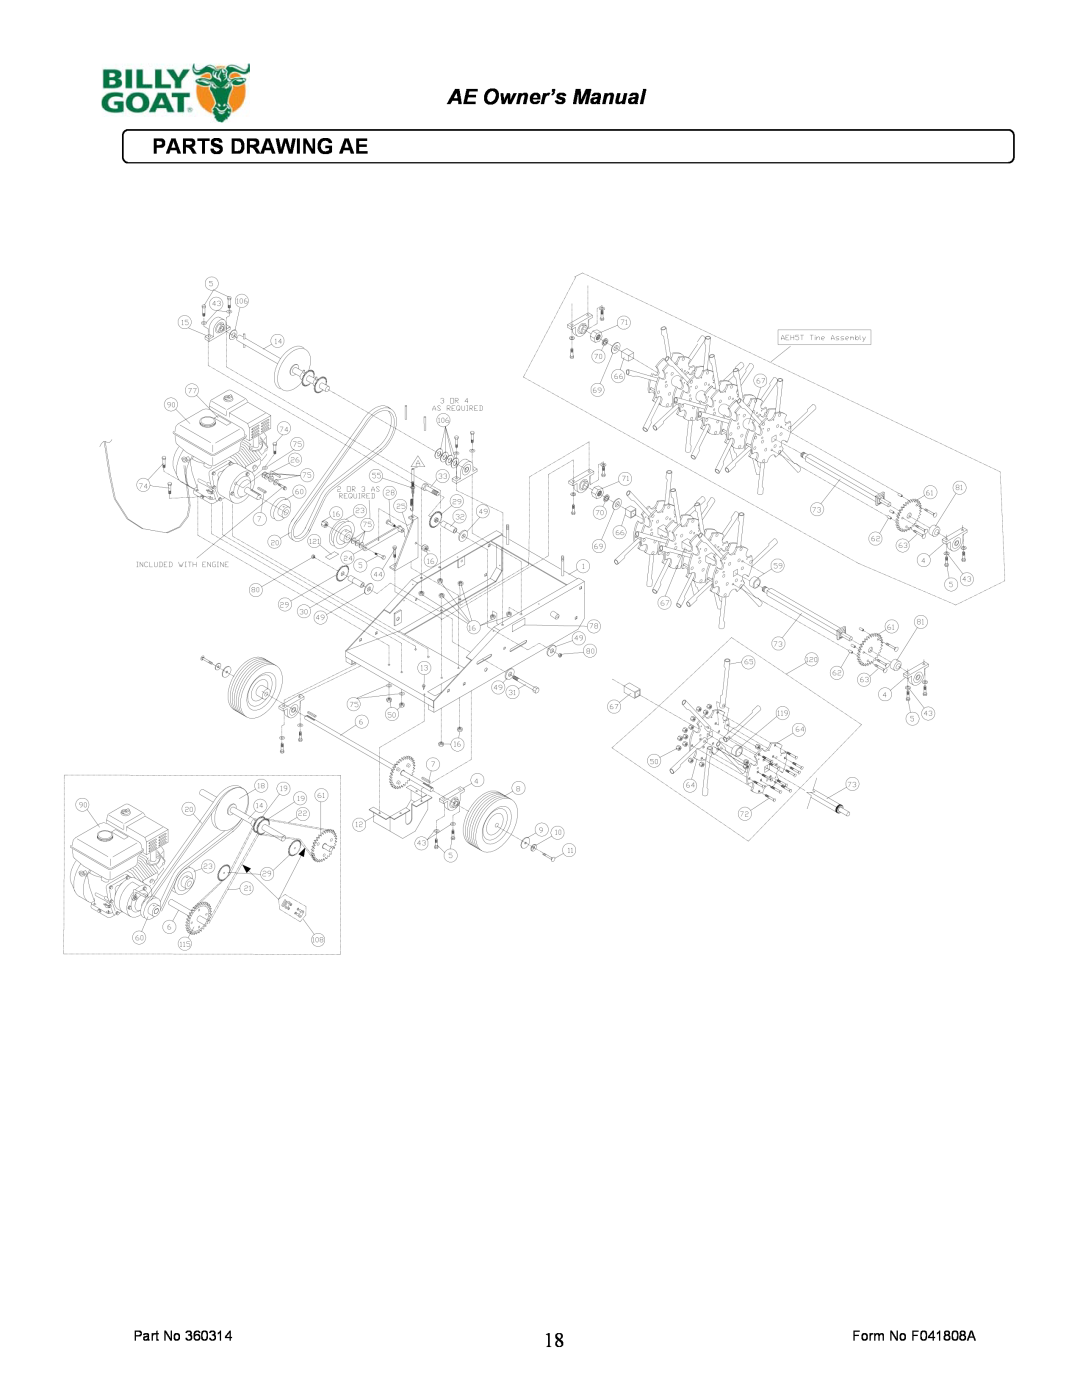 Billy Goat AE401H5T owner manual Parts Drawing Ae 